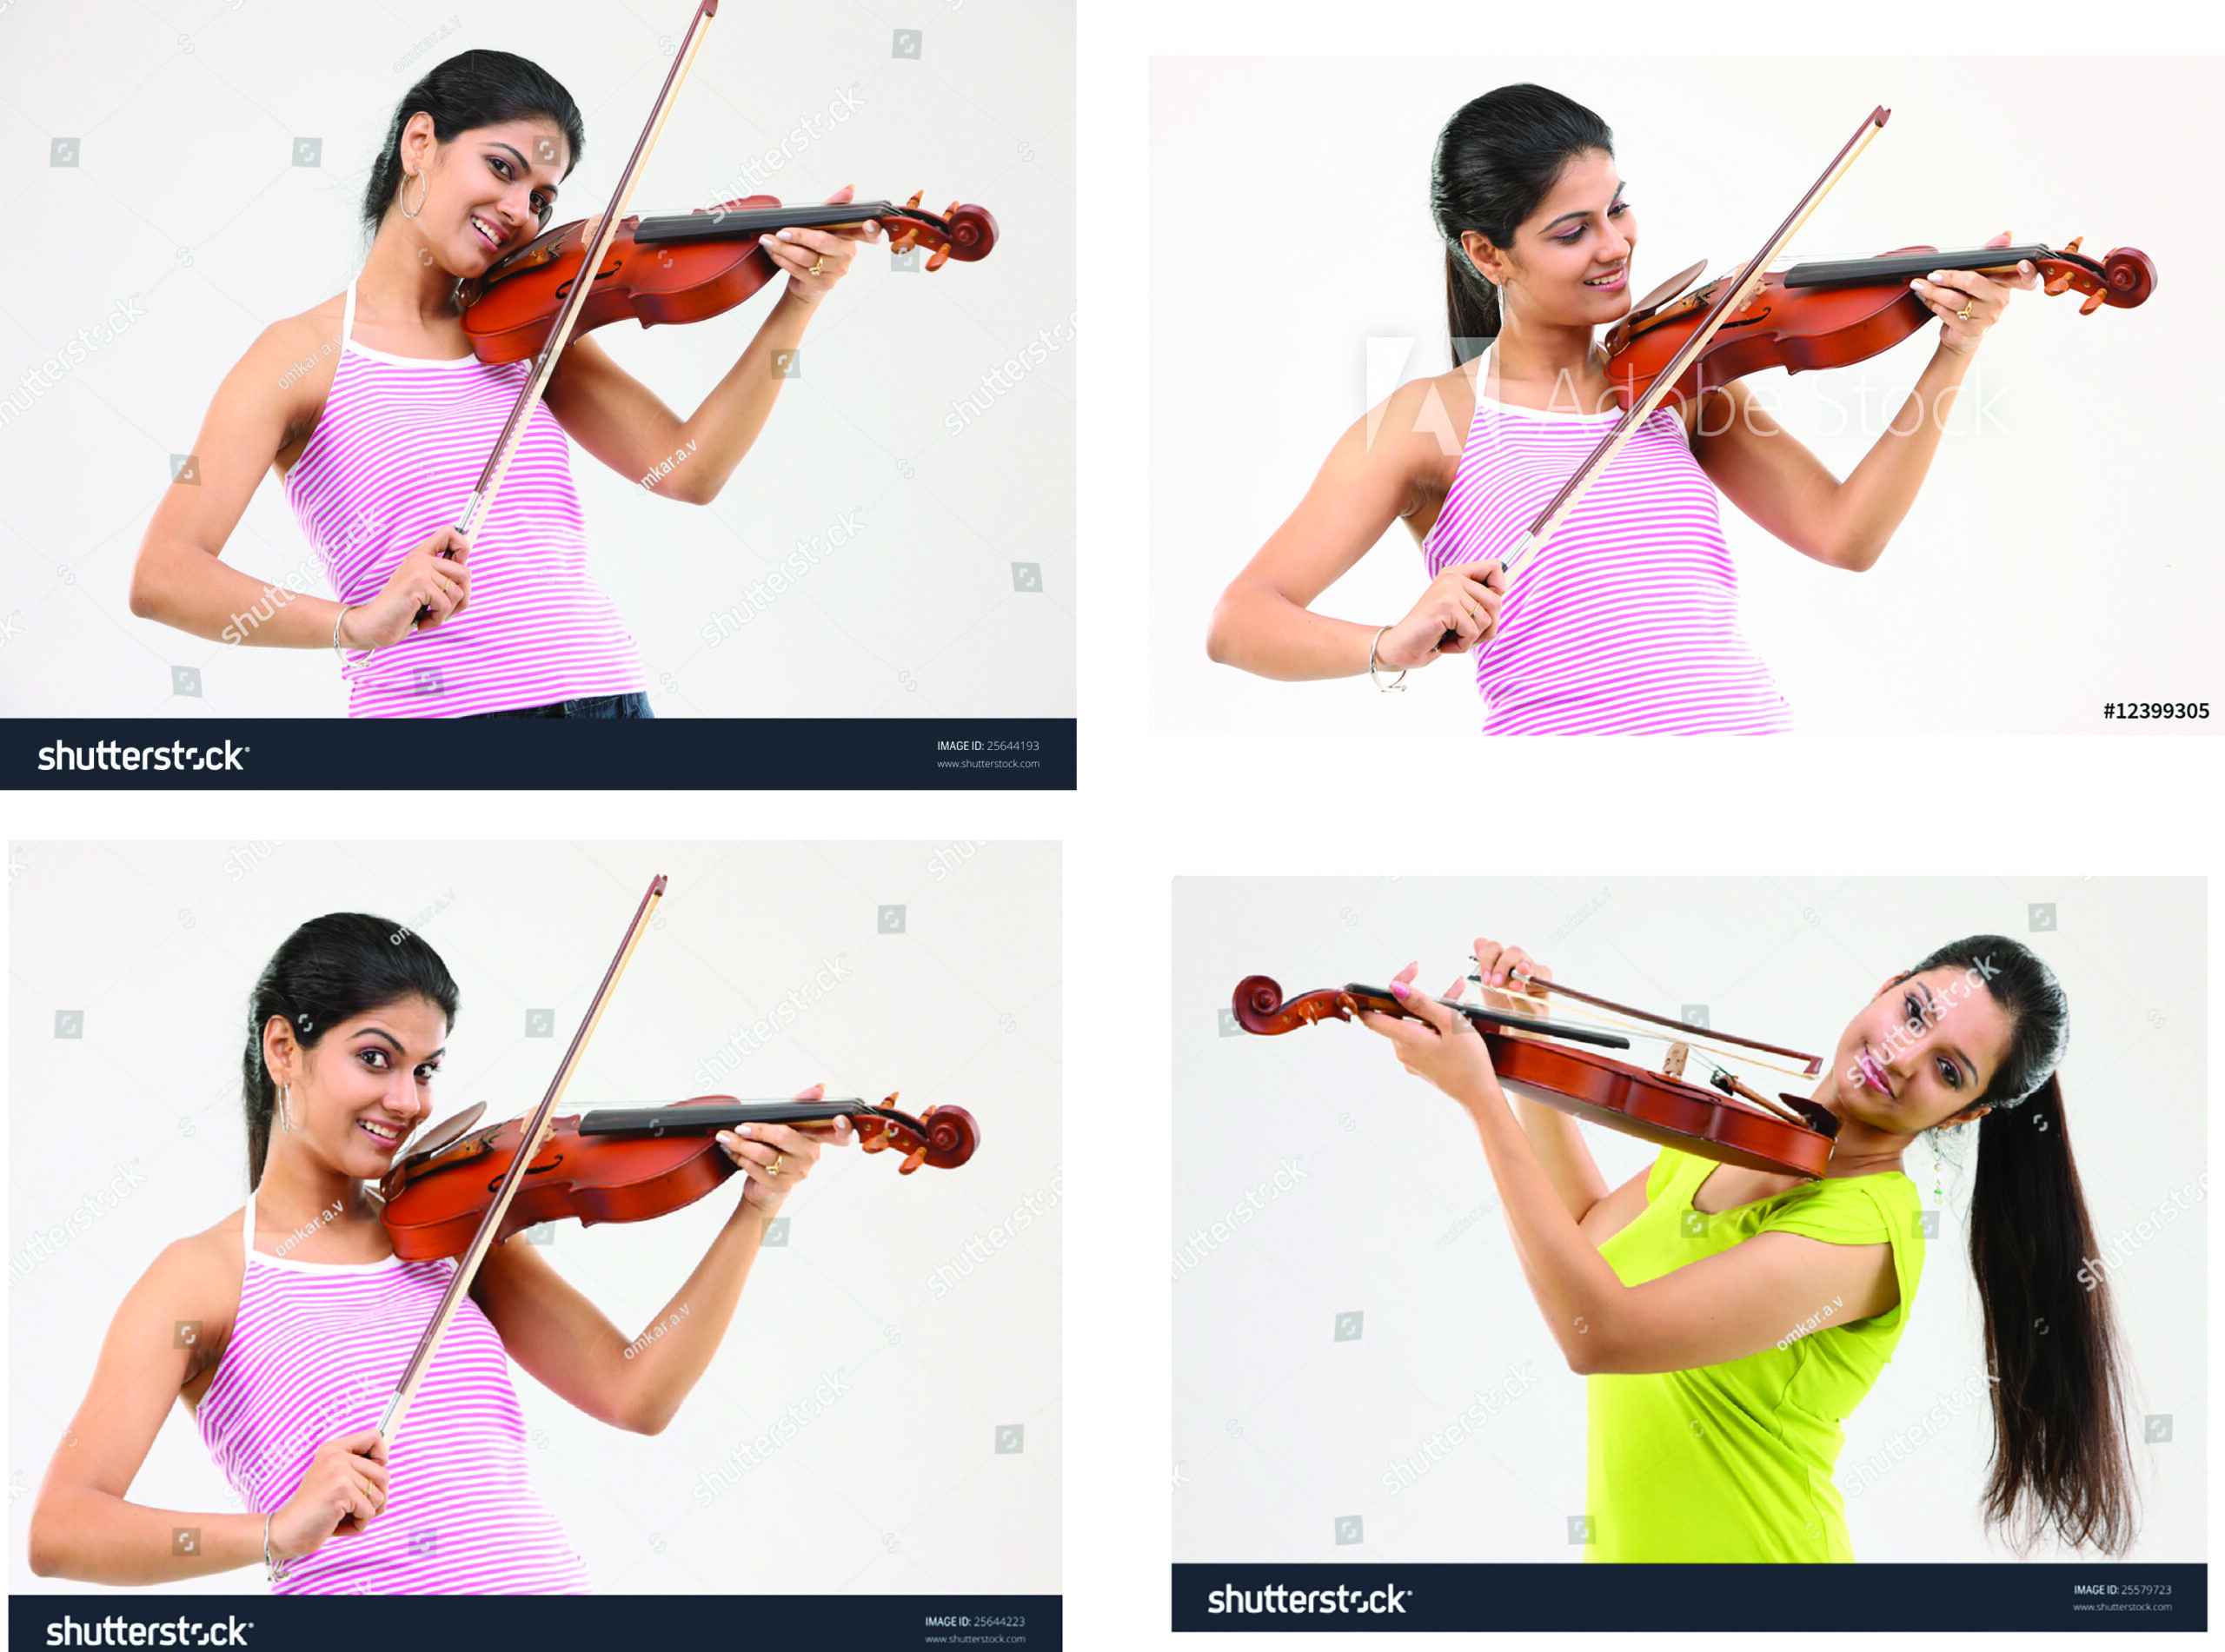 Fig. 4: (Clockwise from top left) <a href=https://www.shutterstock.com/image-photo/glamorous-girl-playing-violin-25644193>“Glamorous girl playing the violin,”</a> <a href=https://www.shutterstock.com/image-photo/young-girl-playing-violin-25644235>Young girl playing violin,”</a> <a href=https://www.shutterstock.com/image-photo/teenage-girl-violin-25644223>“Teenage girl with the violin,”</a> <a href=https://www.shutterstock.com/image-photo/beautiful-girl-playing-violin-25579723>“Beautiful girl playing violin"</a>. 